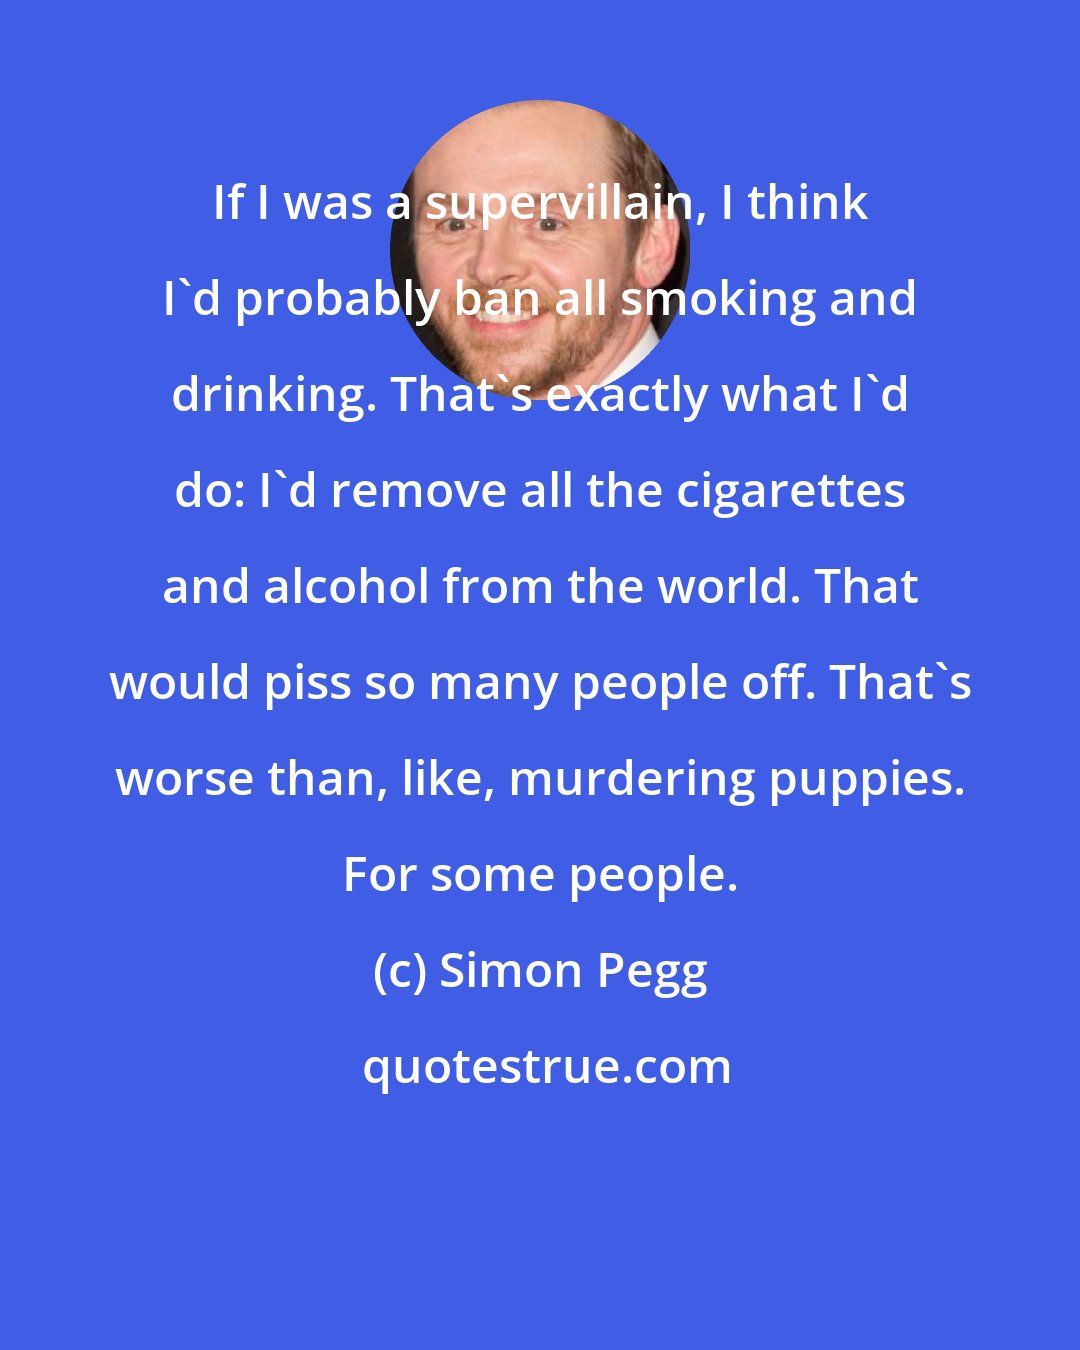 Simon Pegg: If I was a supervillain, I think I'd probably ban all smoking and drinking. That's exactly what I'd do: I'd remove all the cigarettes and alcohol from the world. That would piss so many people off. That's worse than, like, murdering puppies. For some people.